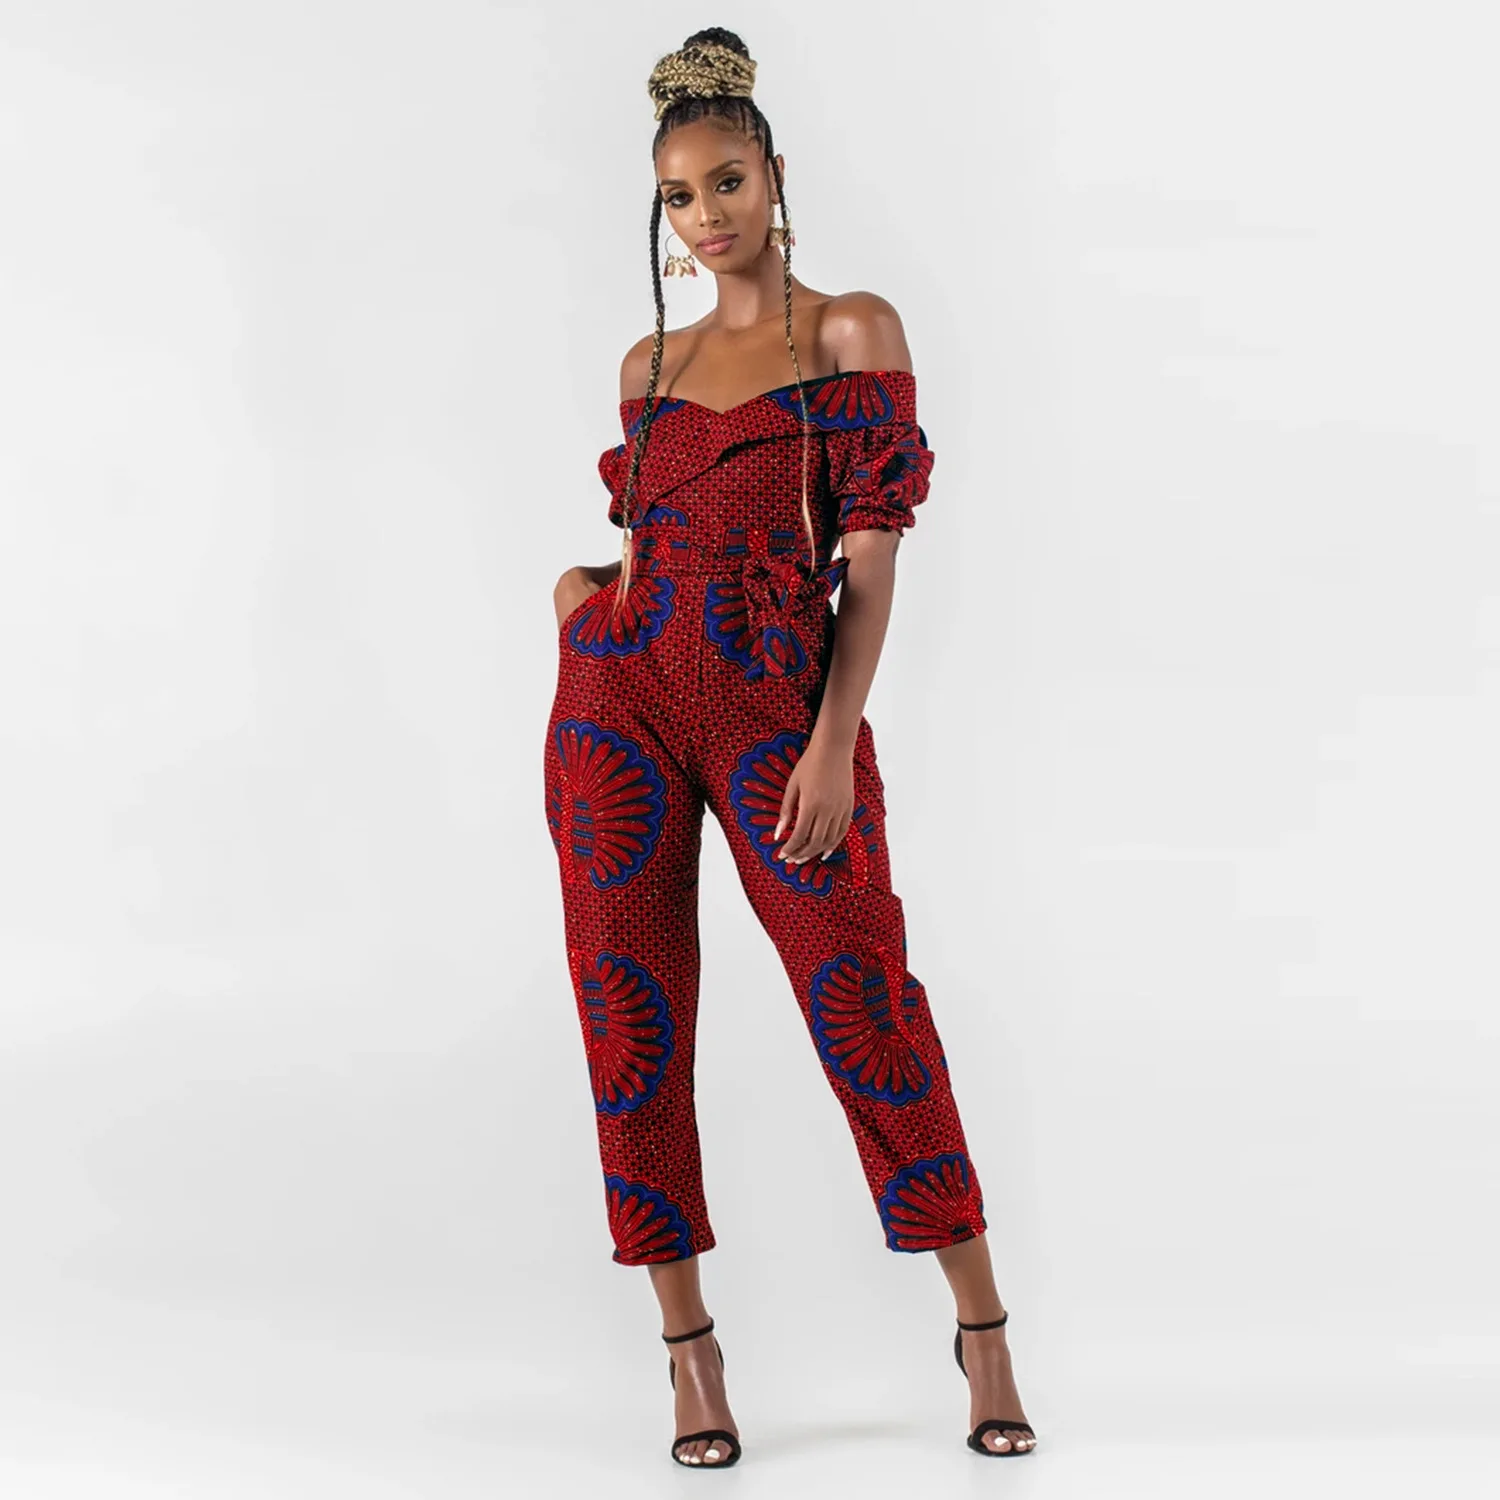 Female Native Jumpsuit styles inspiration | Boombuzz